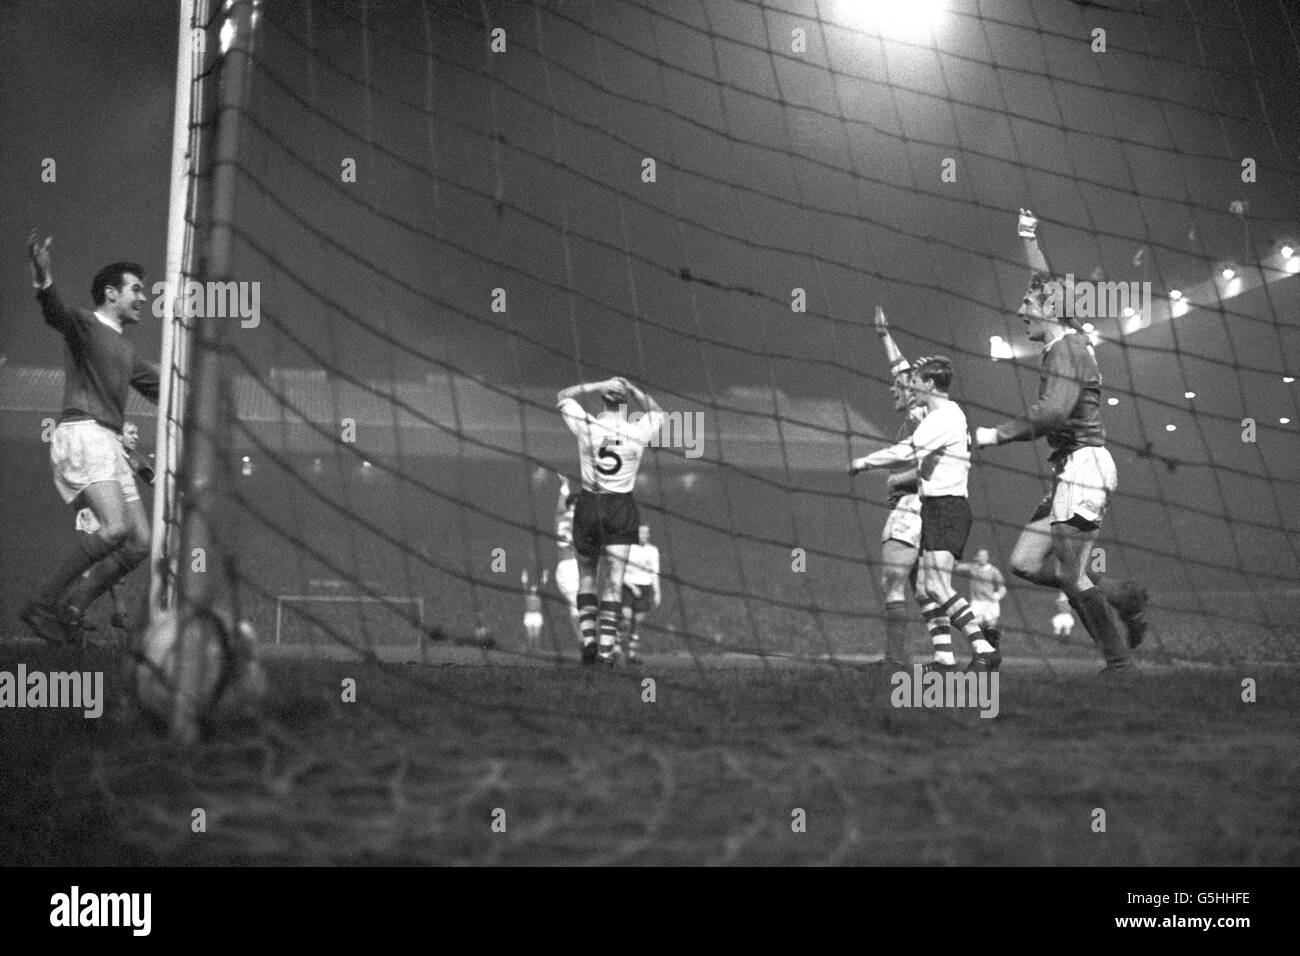 Manchester United's Denis Law (right) throws his hands in the air after scoring the team's second goal in their FA Cup sixth-round replay against Preston North End at Old Trafford. Other players pictured are Manchester United's John Connelly (left) and Preston North End's Anthony Singleton (with hands on head) and Nobby Lawton. Stock Photo